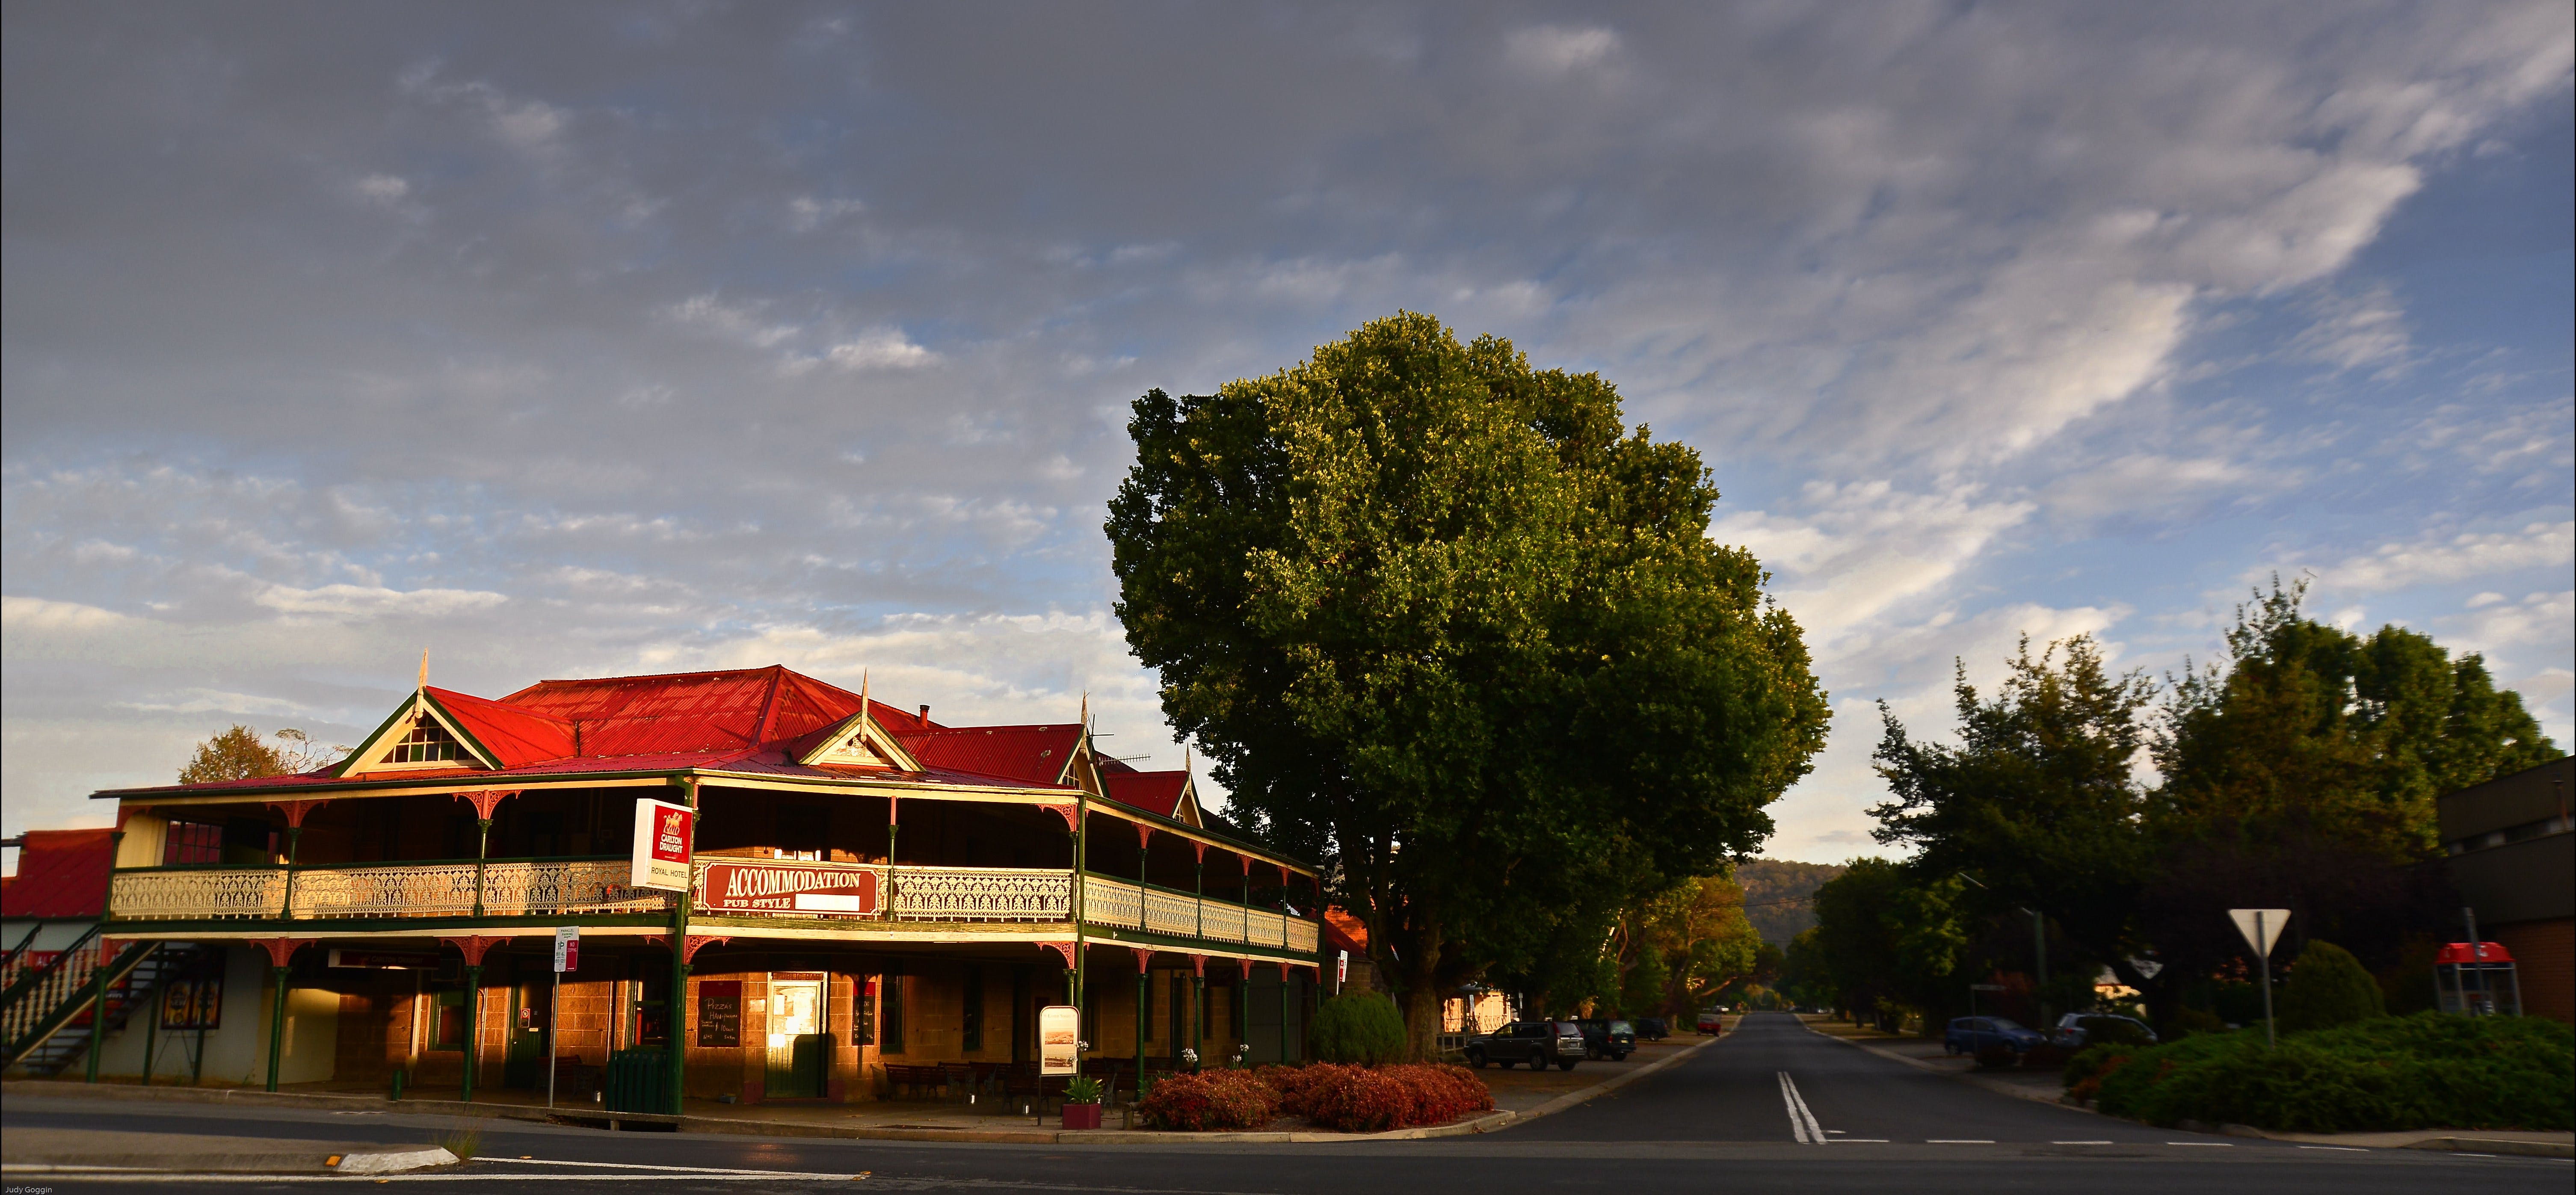 Royal Hotel Cooma - Accommodation Port Macquarie 2